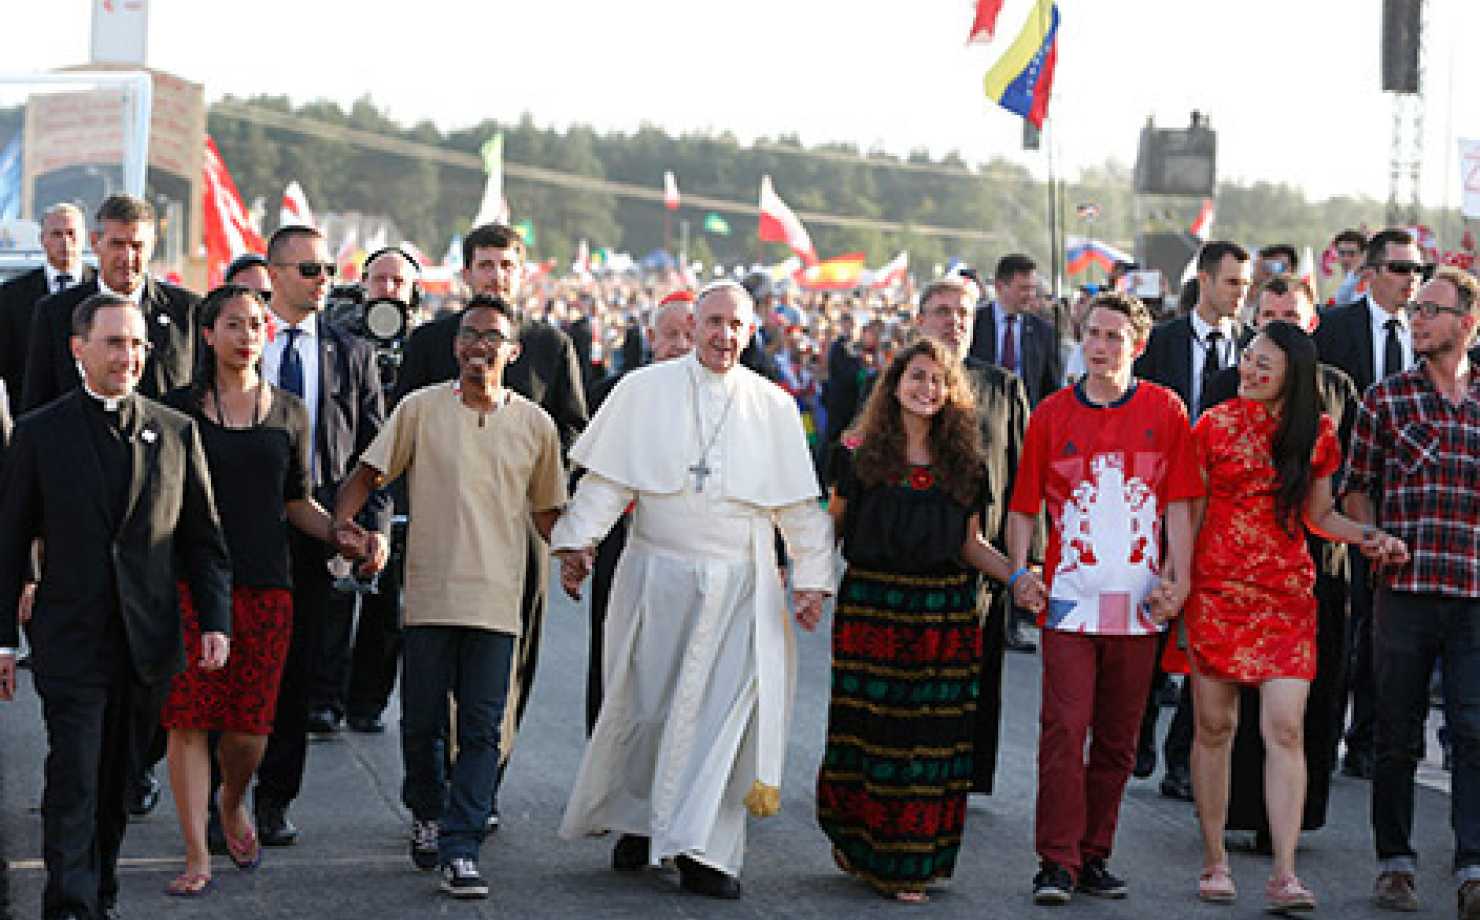 Pope Francis walks with World Youth Day pilgrims as he arrives for a July 30 prayer vigil at the Field of Mercy in Krakow, Poland. (CNS photo/Paul Haring)